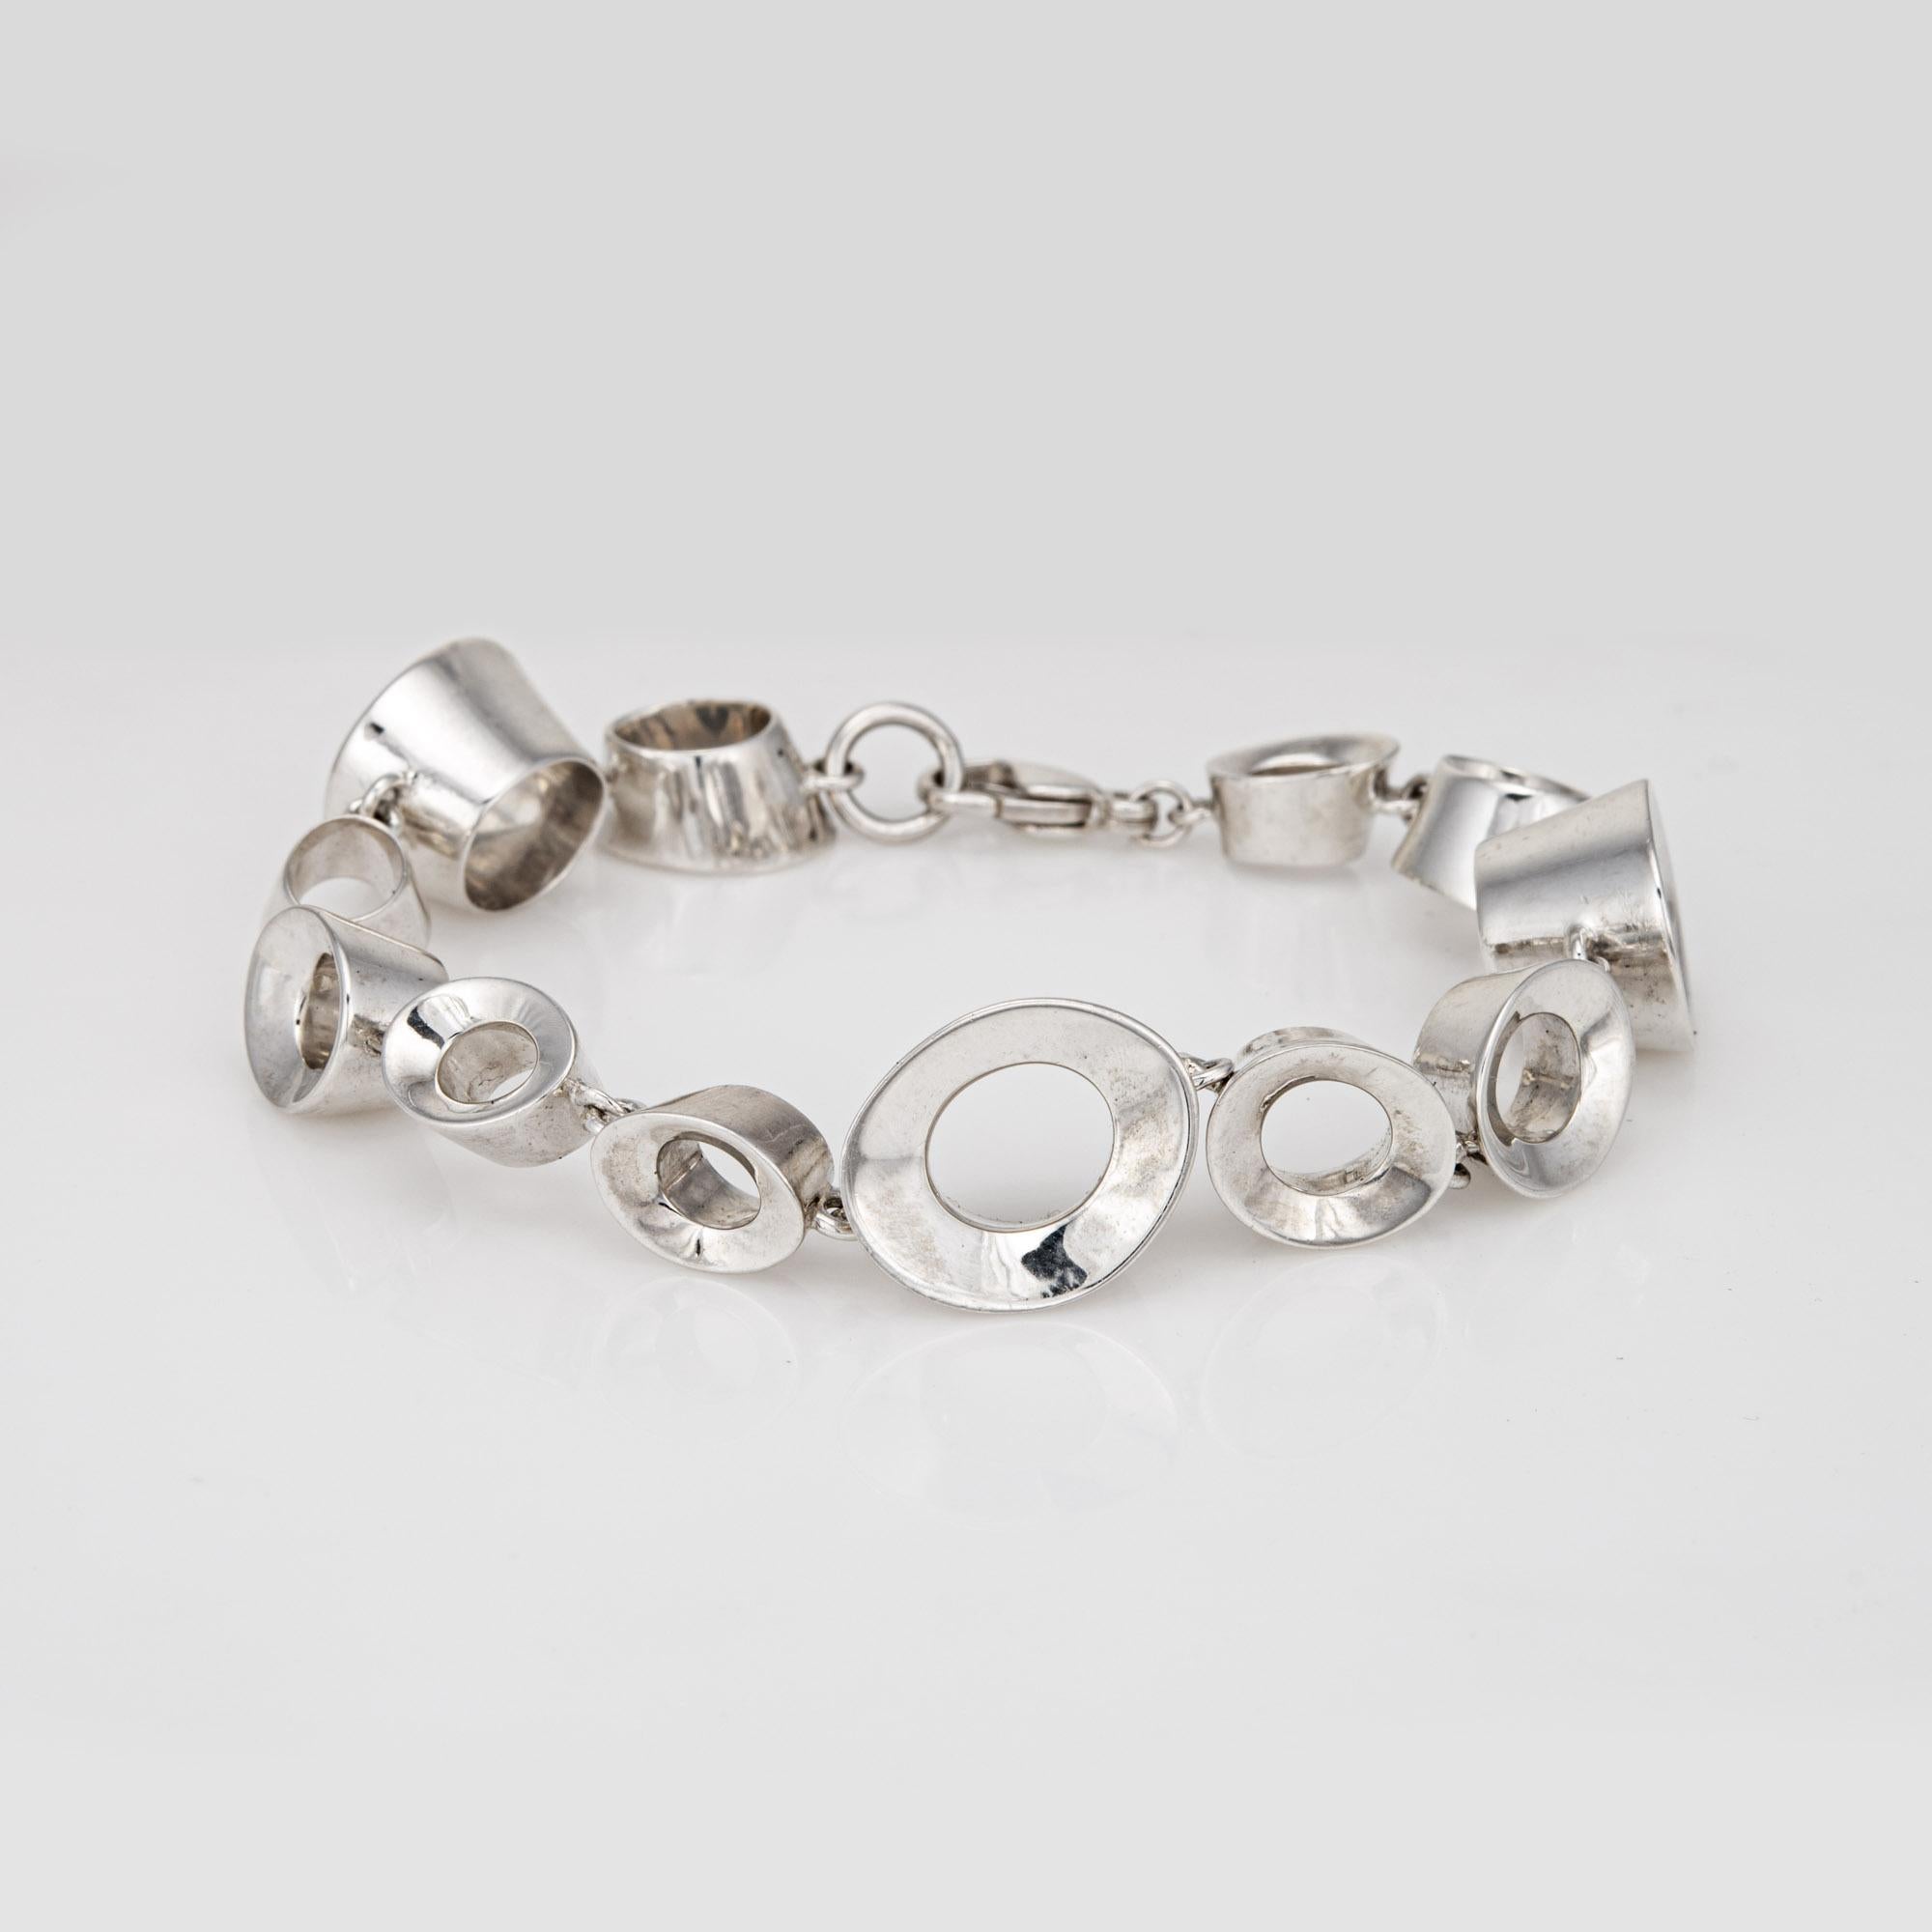 Stylish estate Tiffany & Co Frank Gehry Morph bracelet crafted in sterling silver (circa 2006-2012).  

The chunky bracelet is a Tiffany classic, with thick oval links designed by the famed Frank Gehry. No longer available for sale at Tiffany & Co,